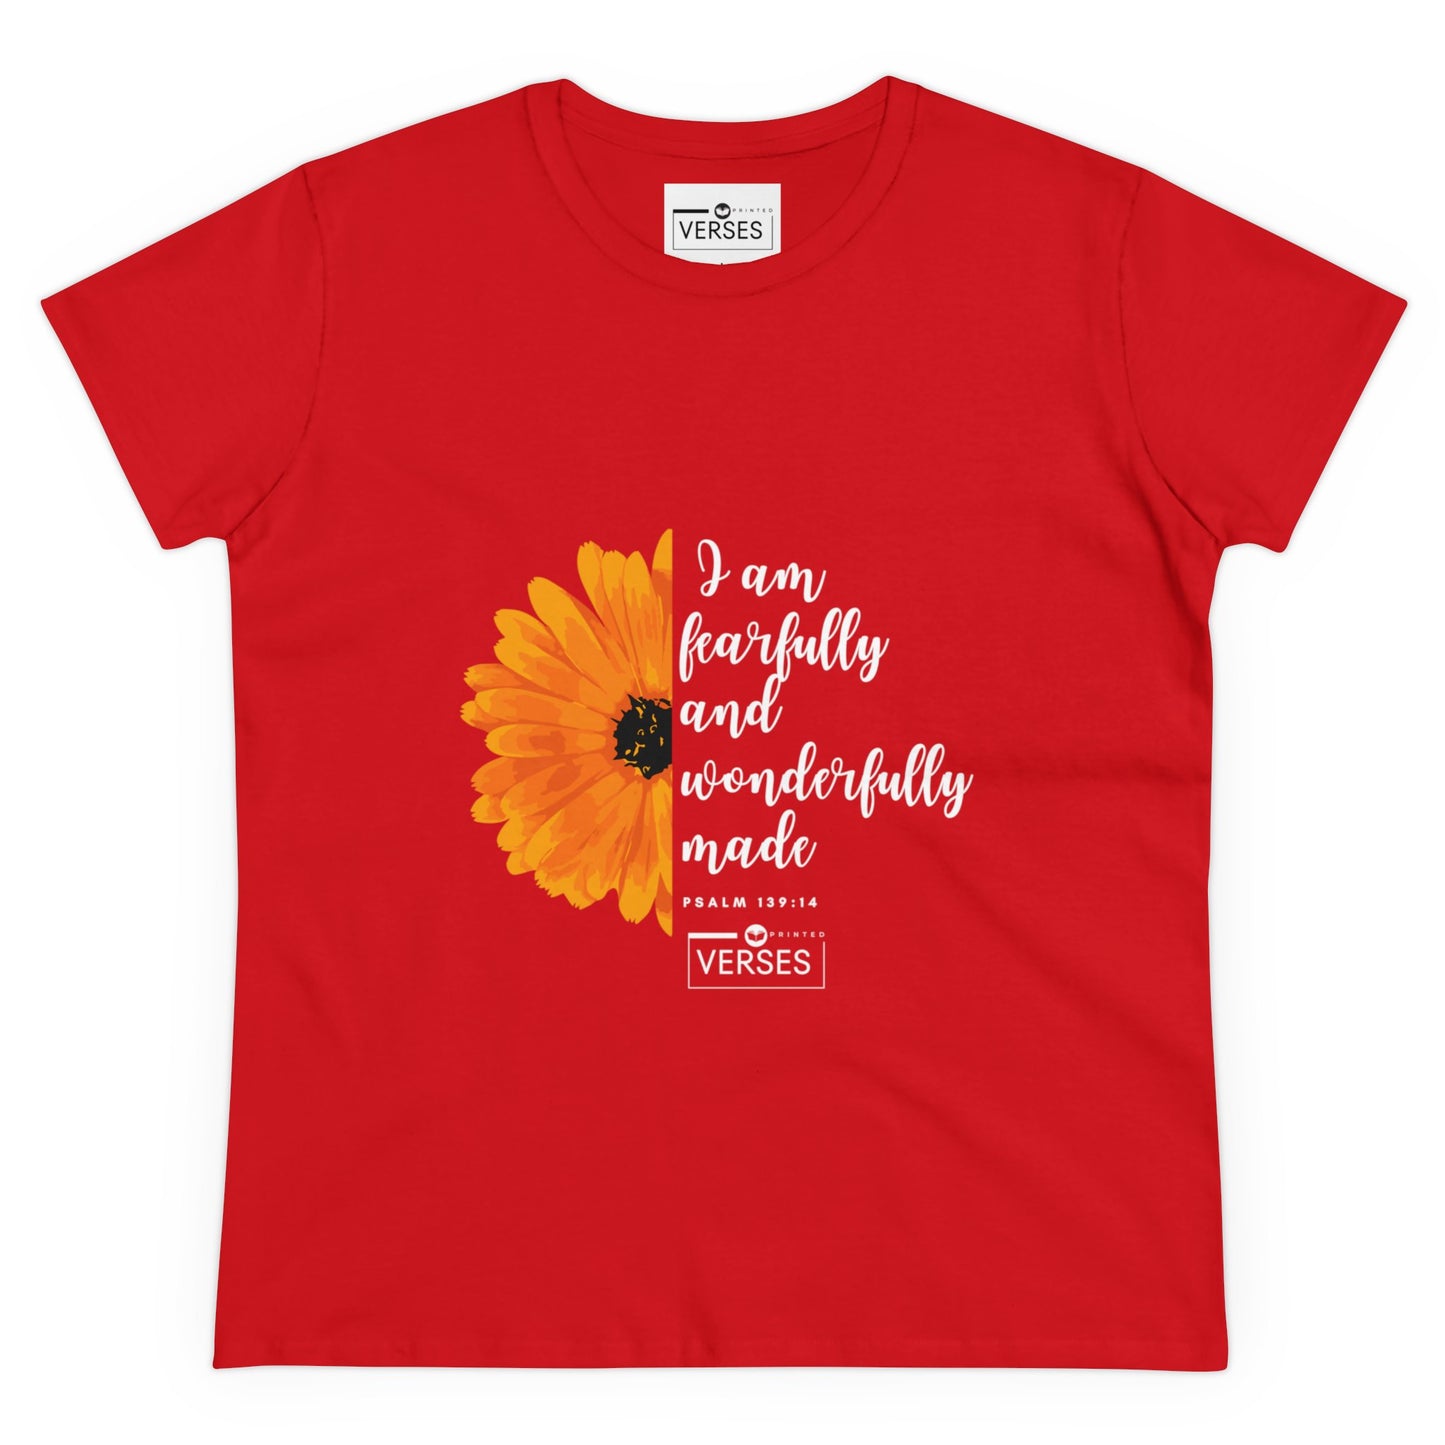 I AM FEARFULLY AND WONDERFULLY MADE - LADIES DRK TEE